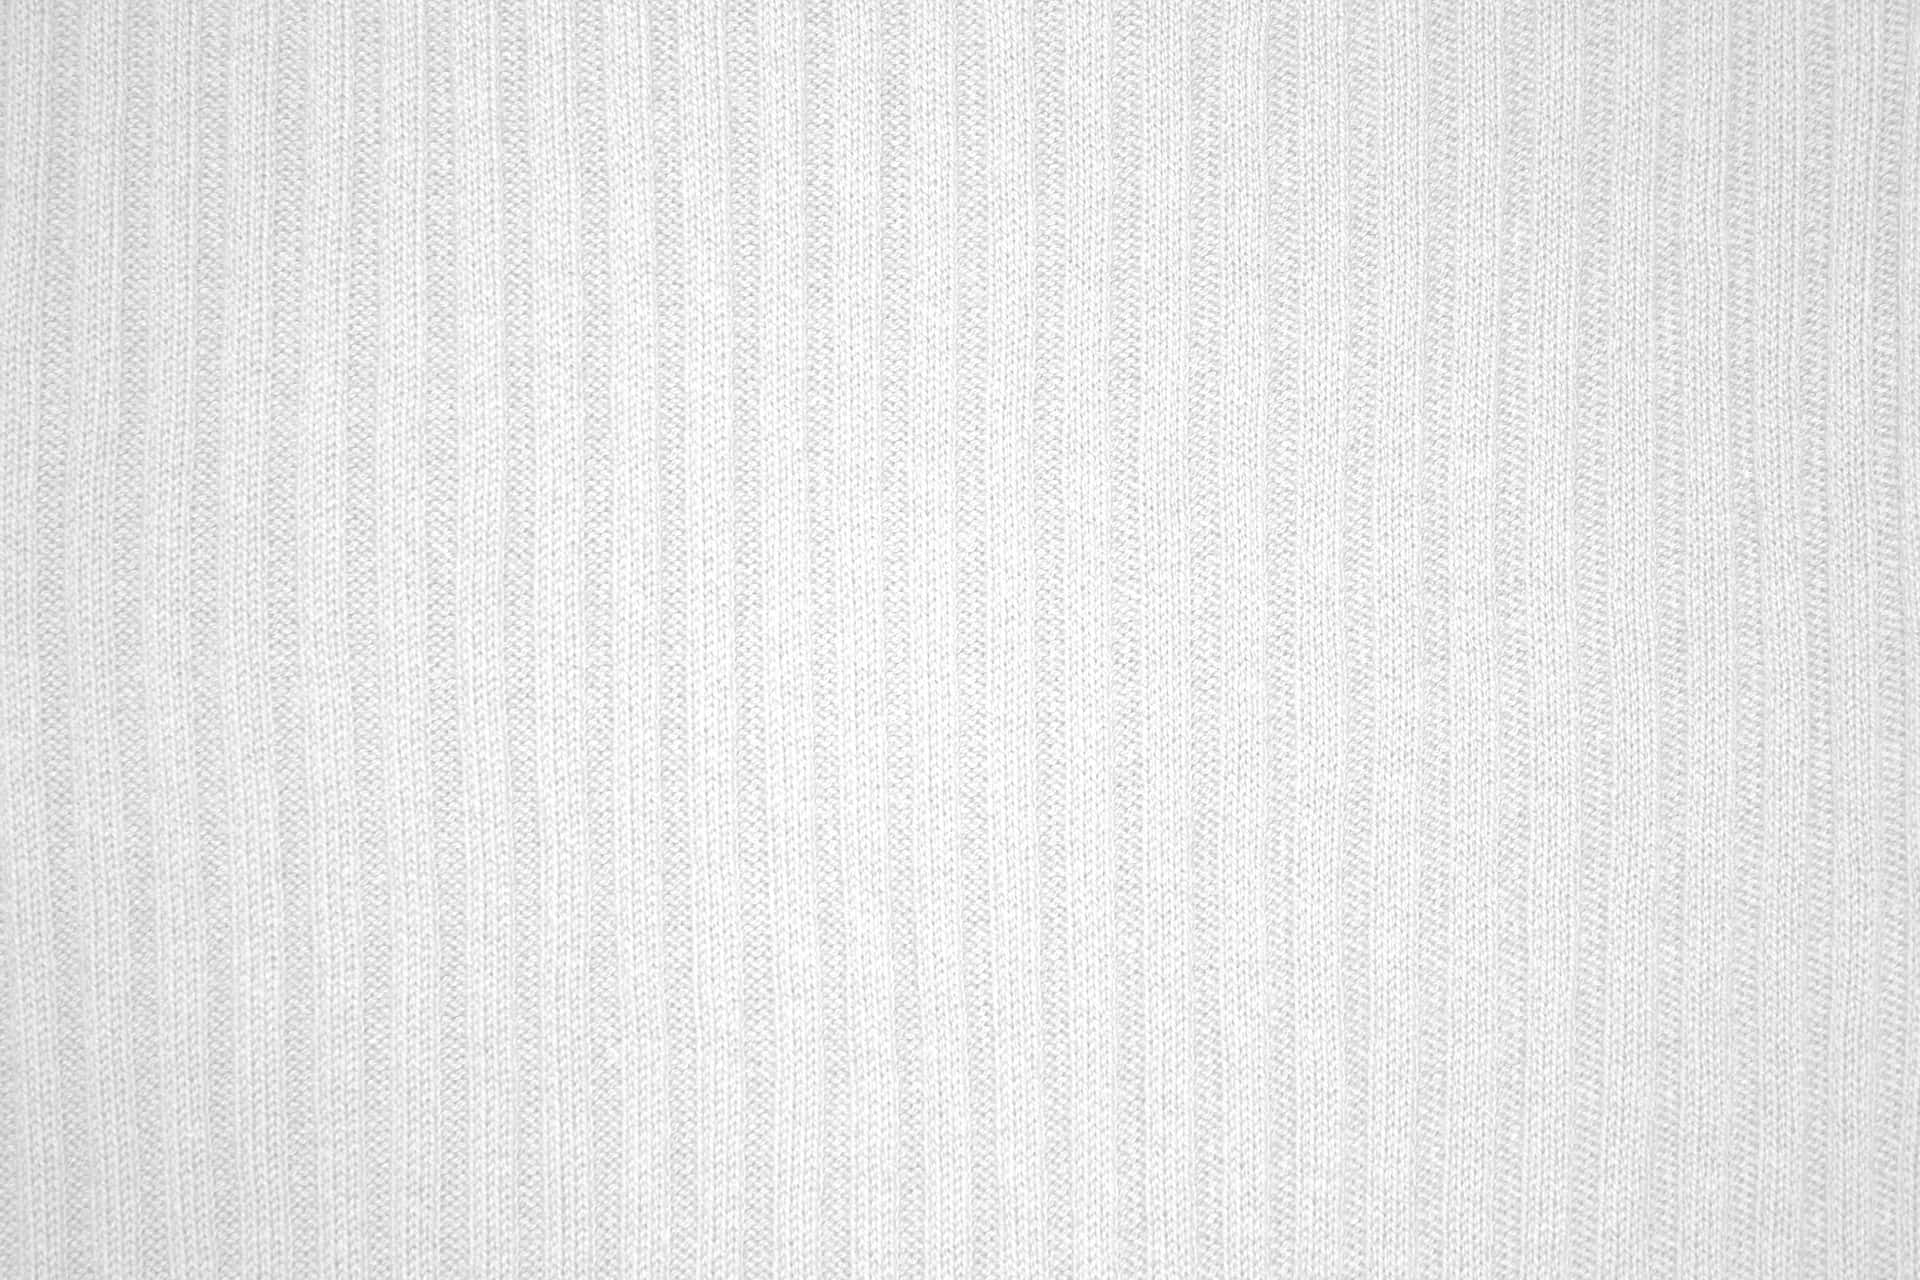 Download Wool Sweater White Texture Pictures | Wallpapers.com